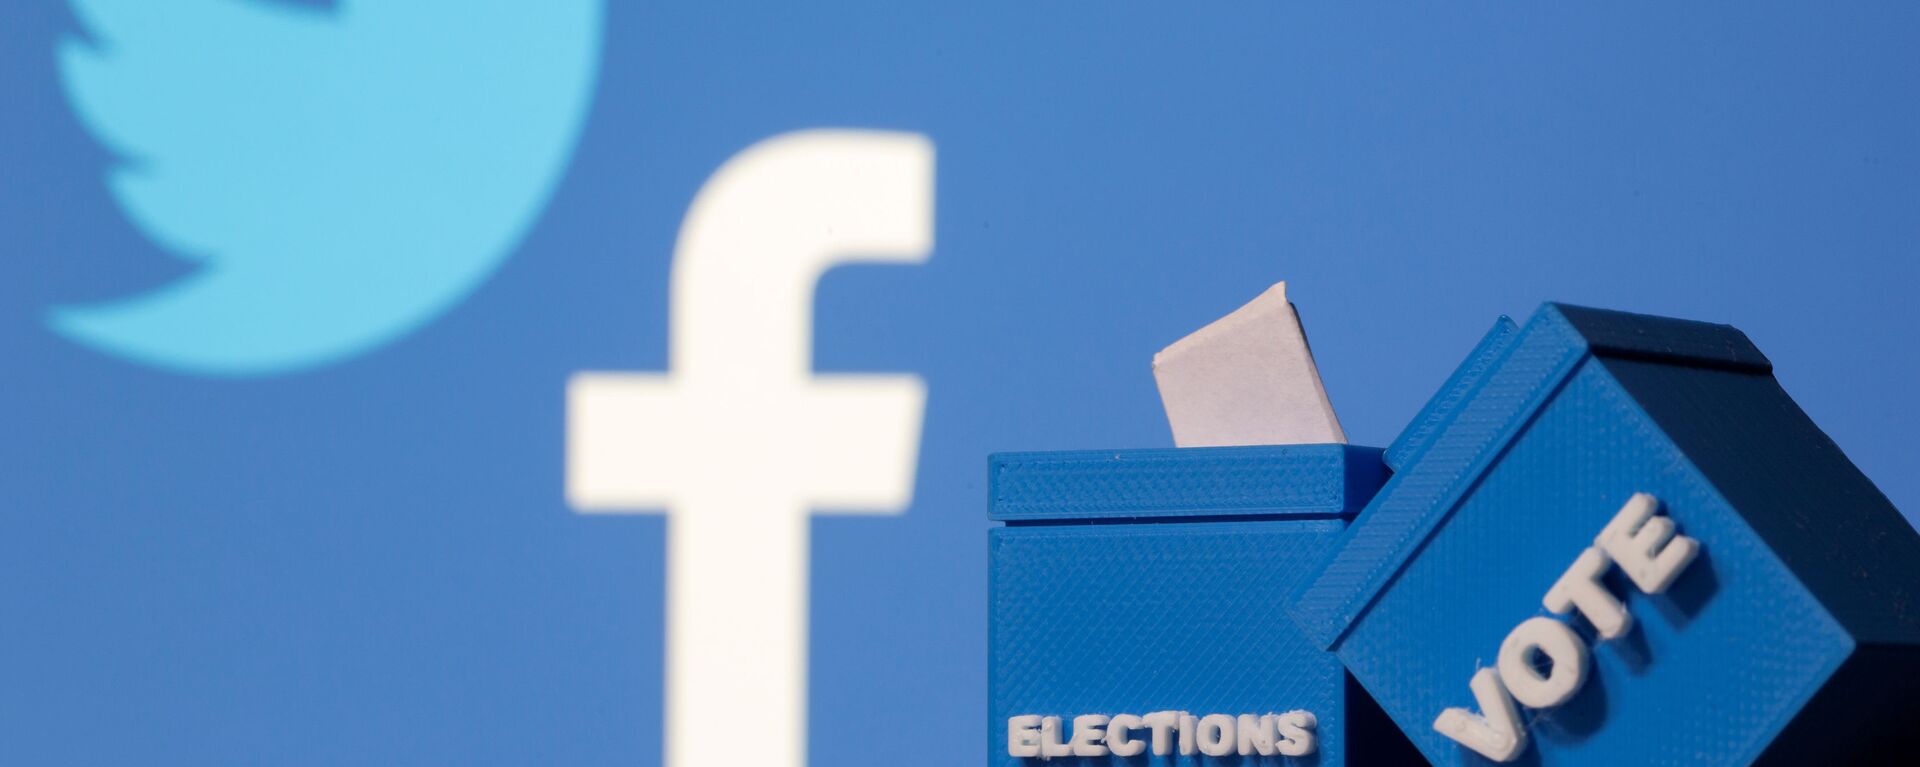 3D-printed ballot boxes are seen in front of displayed Facebook and Twitter logos in this illustration taken November 4, 2020 - Sputnik International, 1920, 14.01.2021